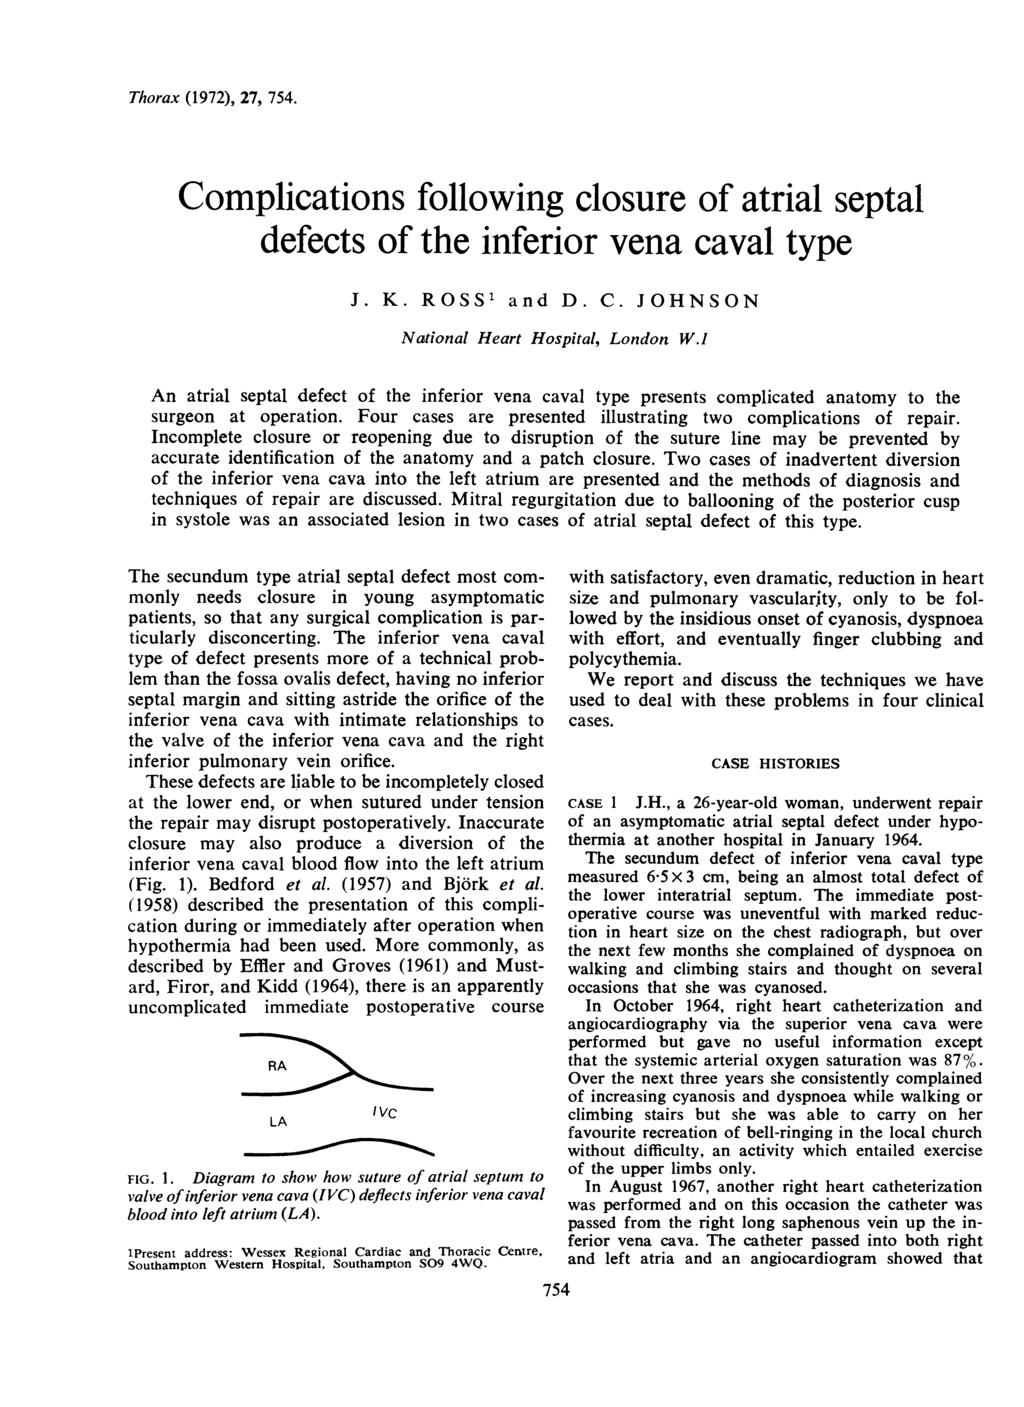 Thorax (1972), 27, 754. Complications following closure of atrial septal defects of the inferior vena caval type J. K. ROSS1 and D. C. JOHNSON National Heart Hospital, London W.